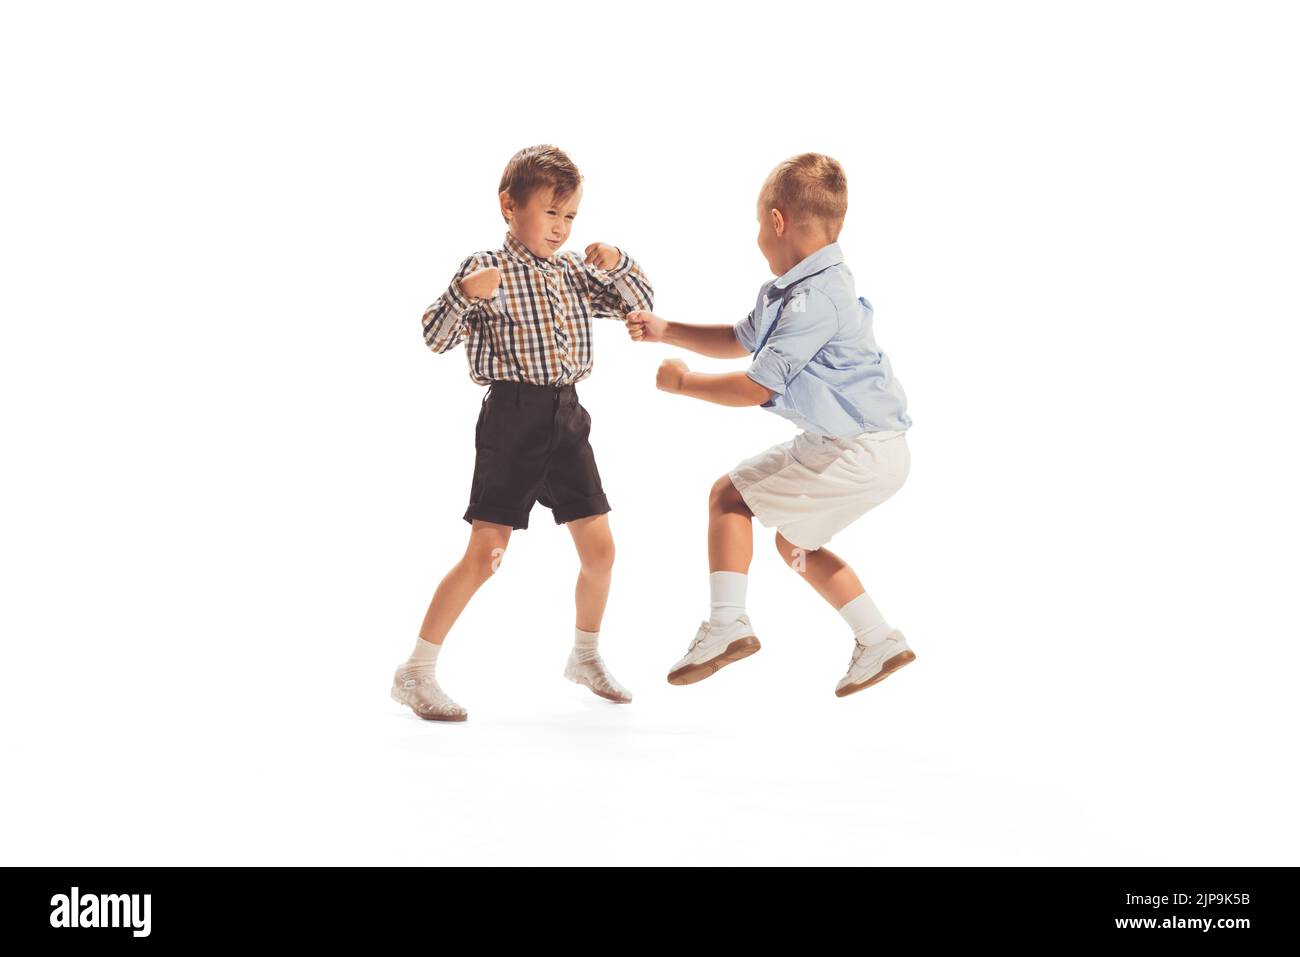 Portrait of two little boys, children playing together, having fun isolated over white studio background Stock Photo